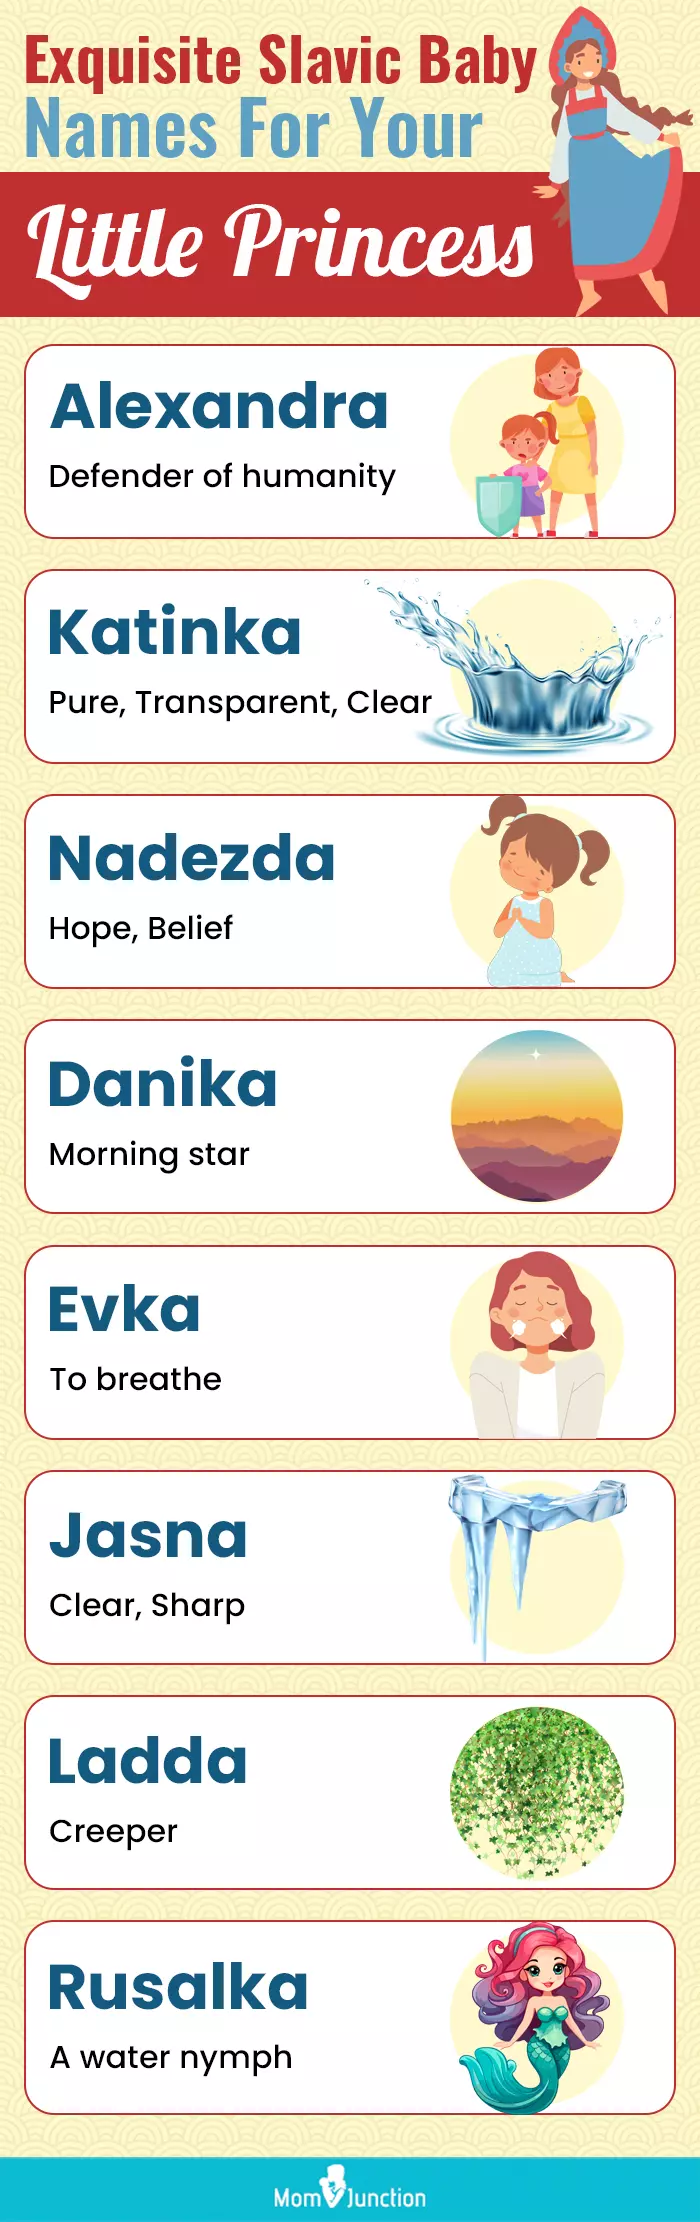 exquisite slavic baby names for your little princess (infographic)